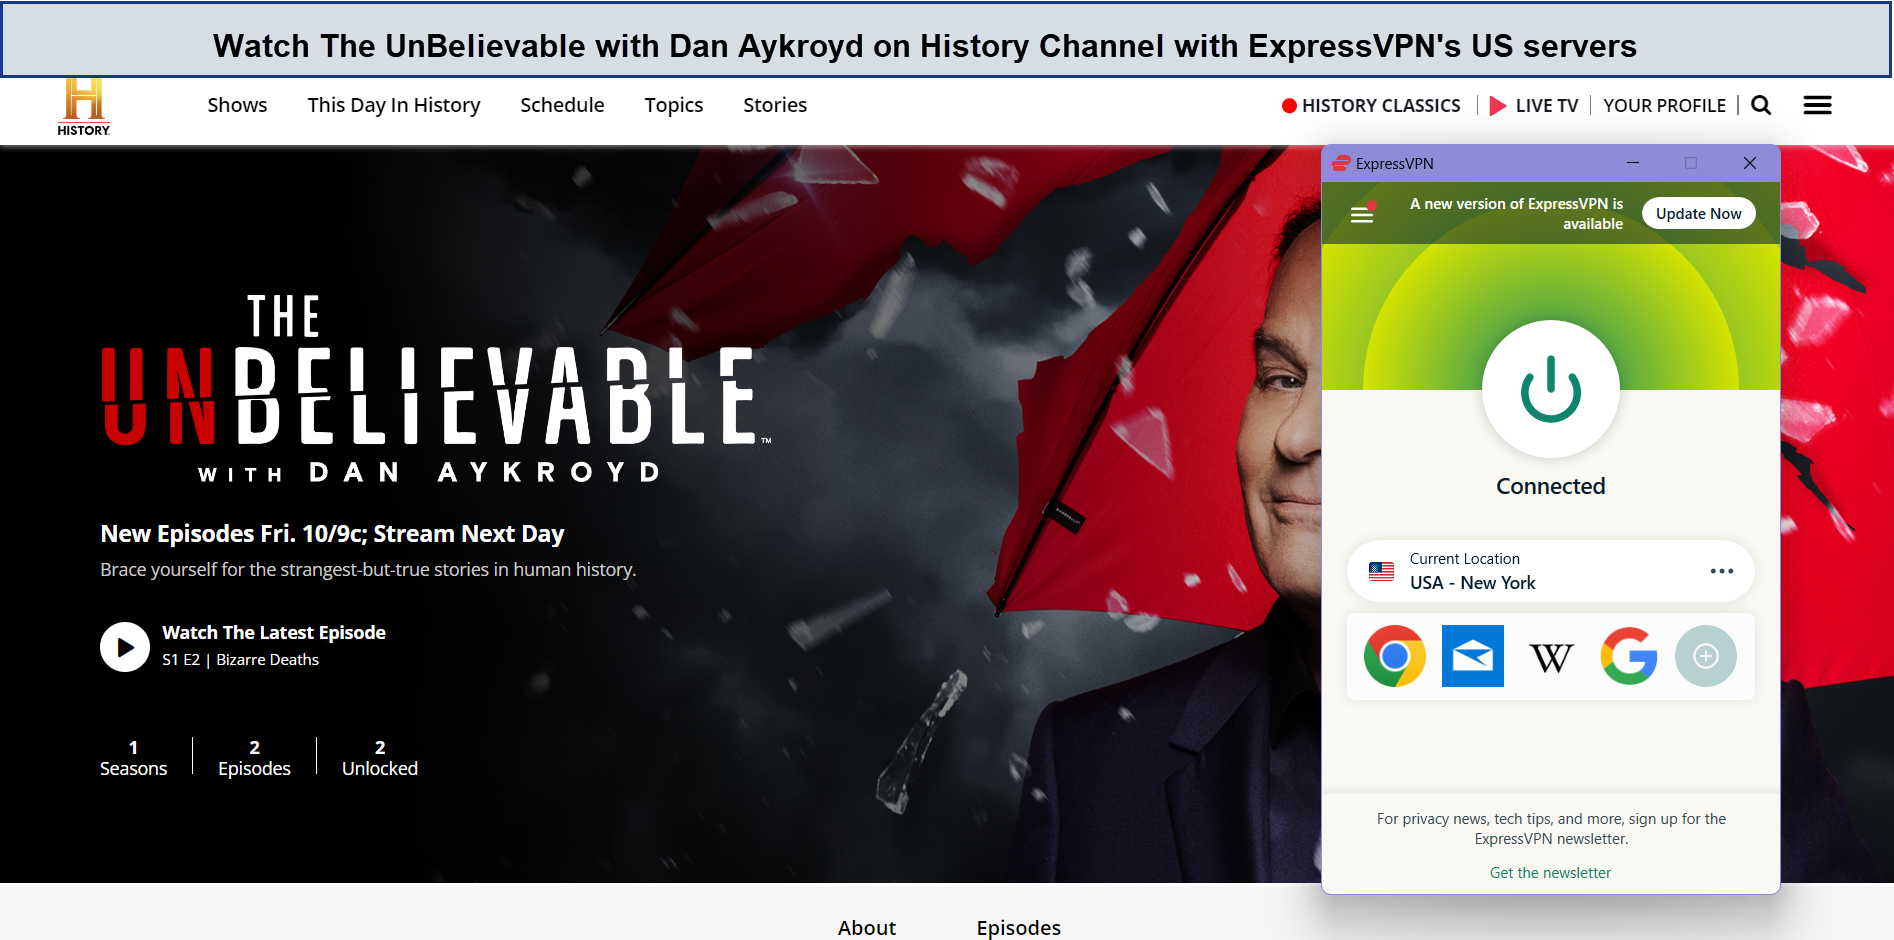 Watch-The-UnBelievable-with-Dan-Aykroyd-on-History-Channel-with-ExpressVPN-in-Italy